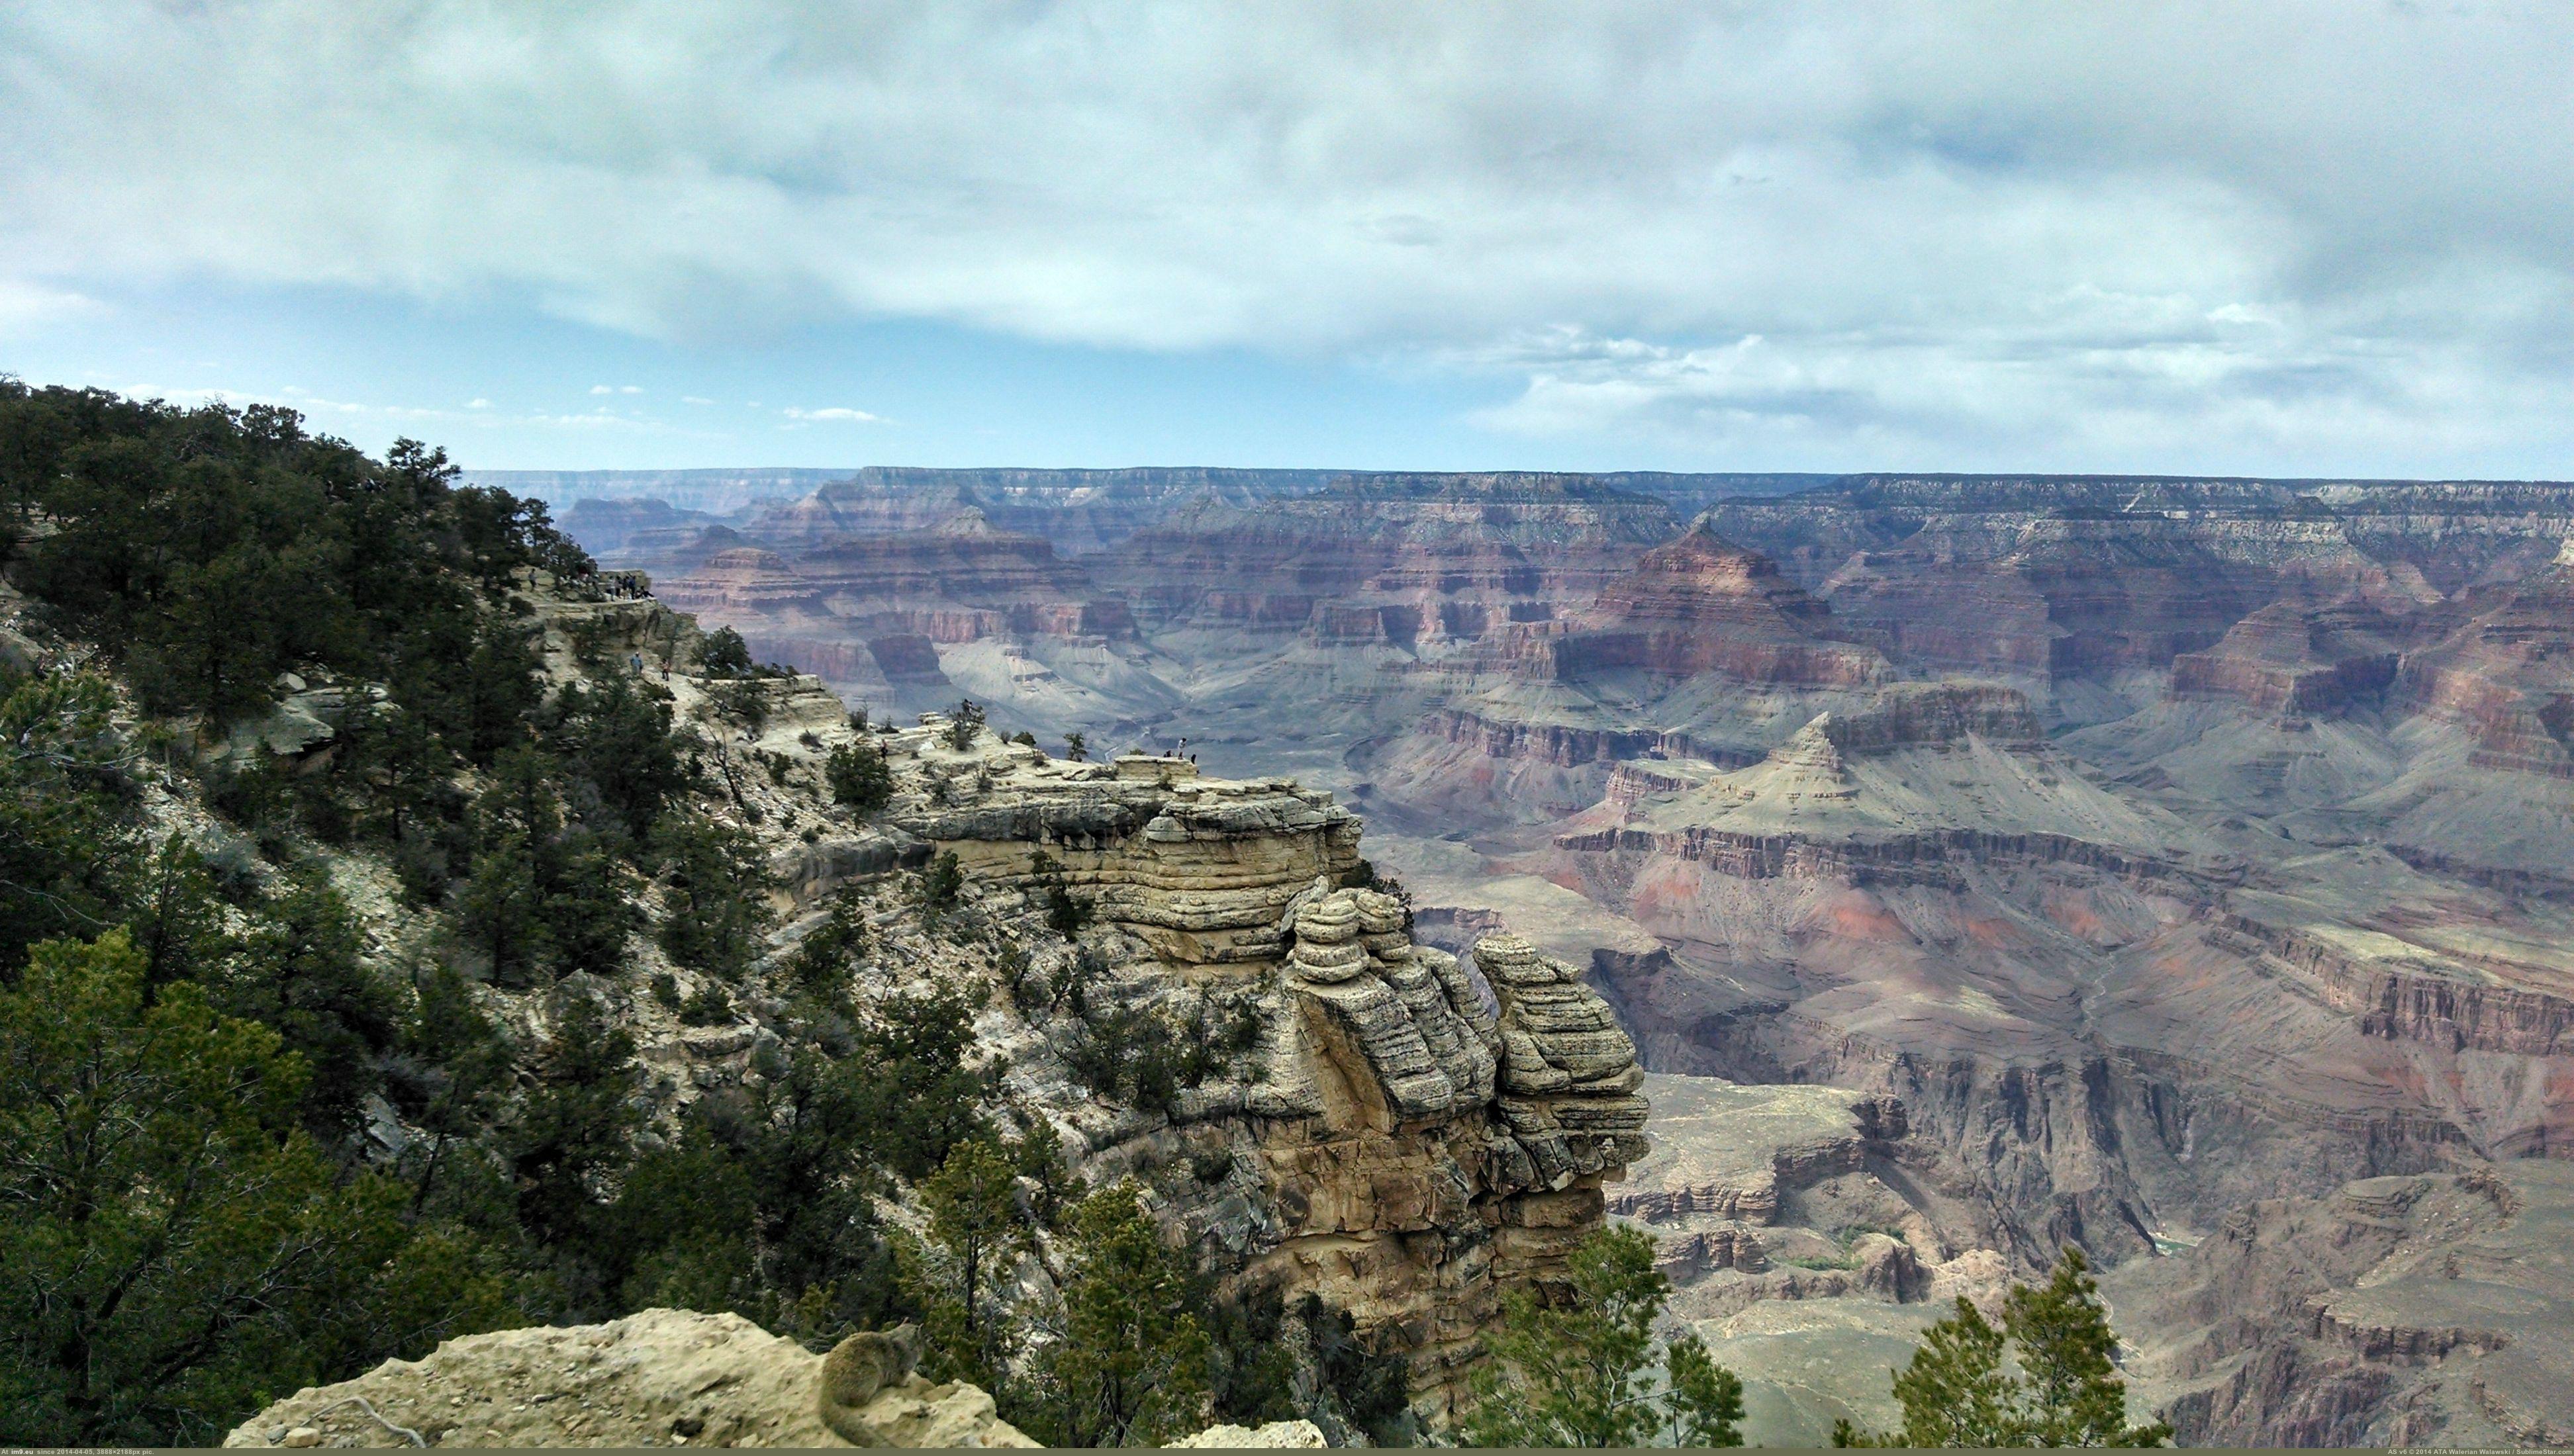 Porn Star Grand Canyon - Pic. #South #Week #Grand #Rim #Pleased #Canyon #Phone, 1269539B â€“ My  r/EARTHPORN favs